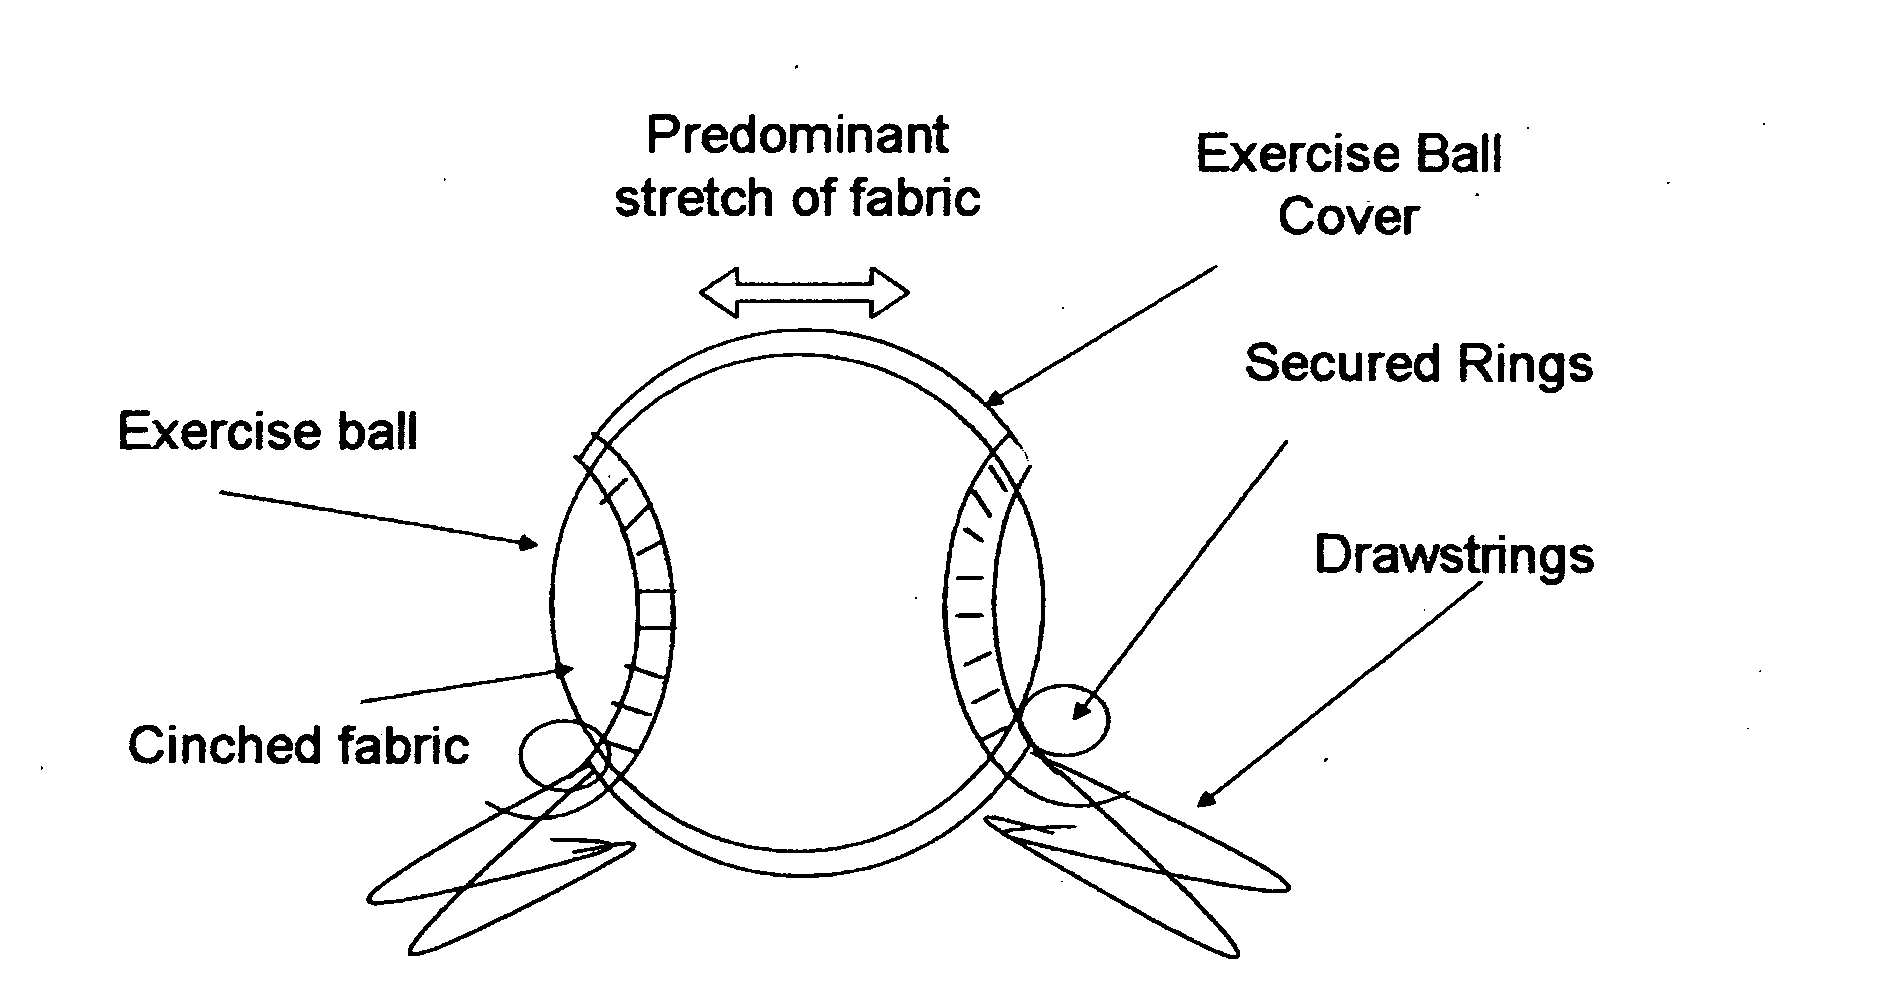 Personal exercise equipment cover